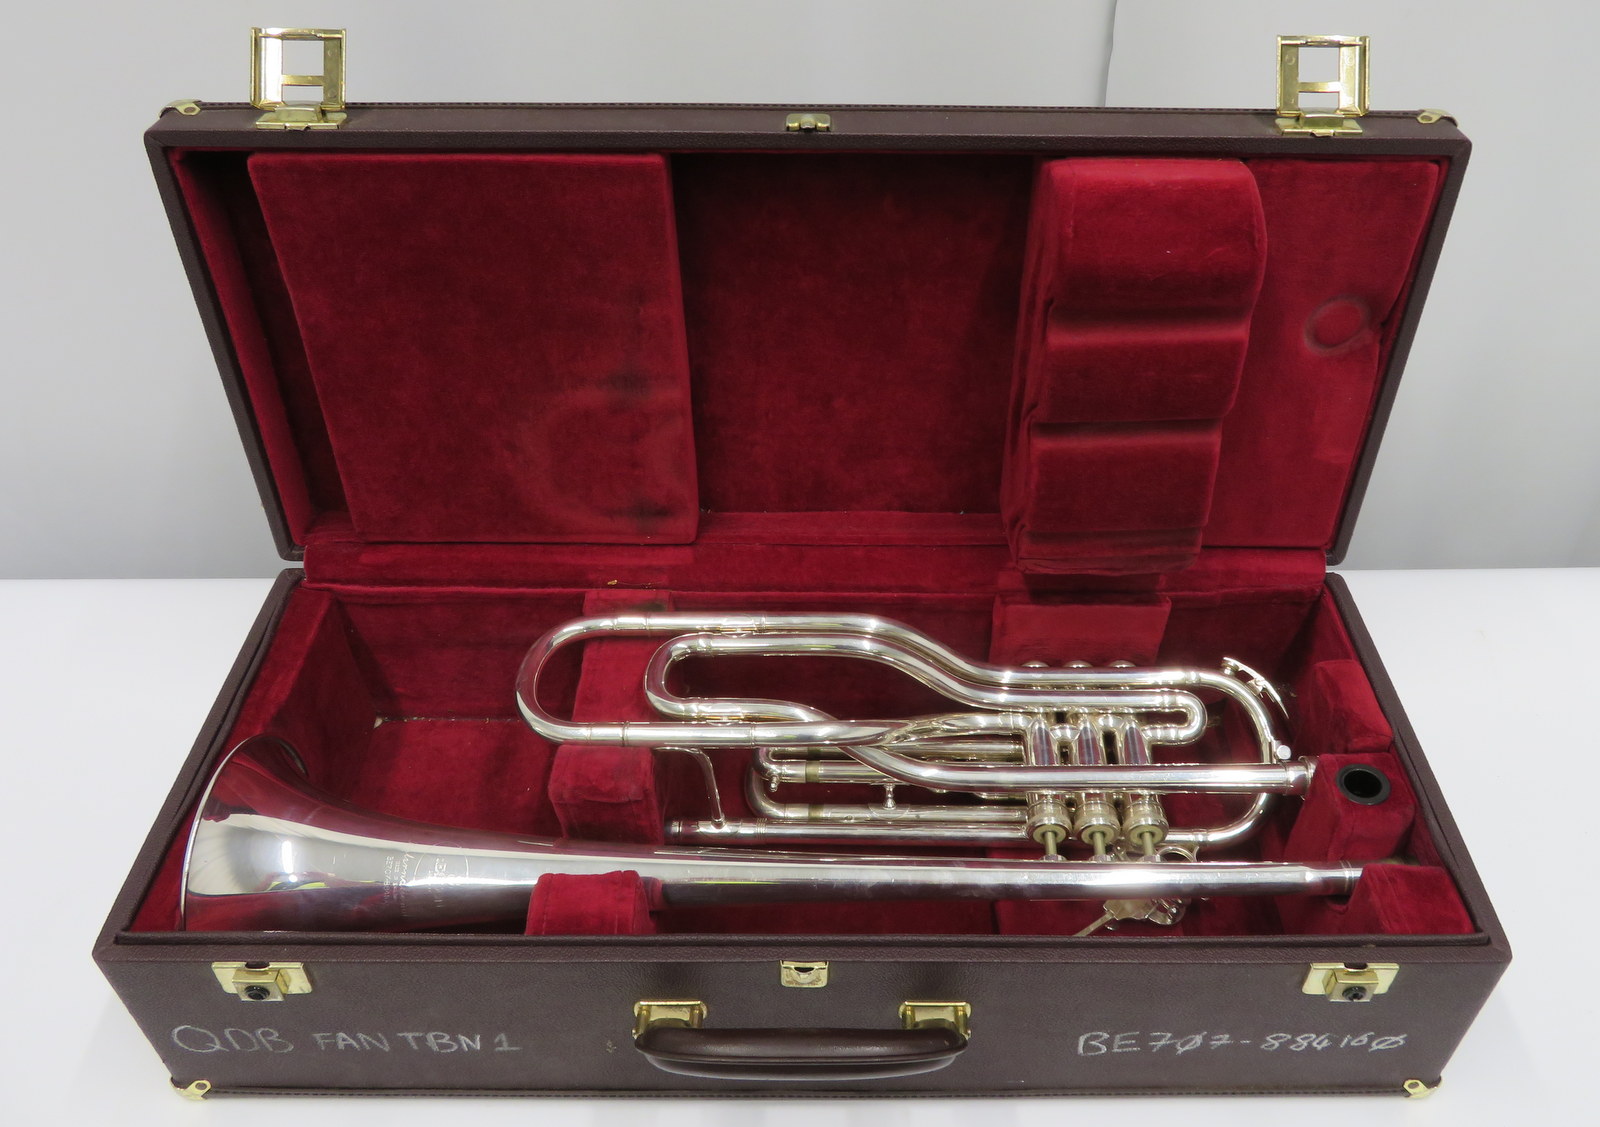 Besson International BE707 fanfare trumpet with case. Serial number: 884160.